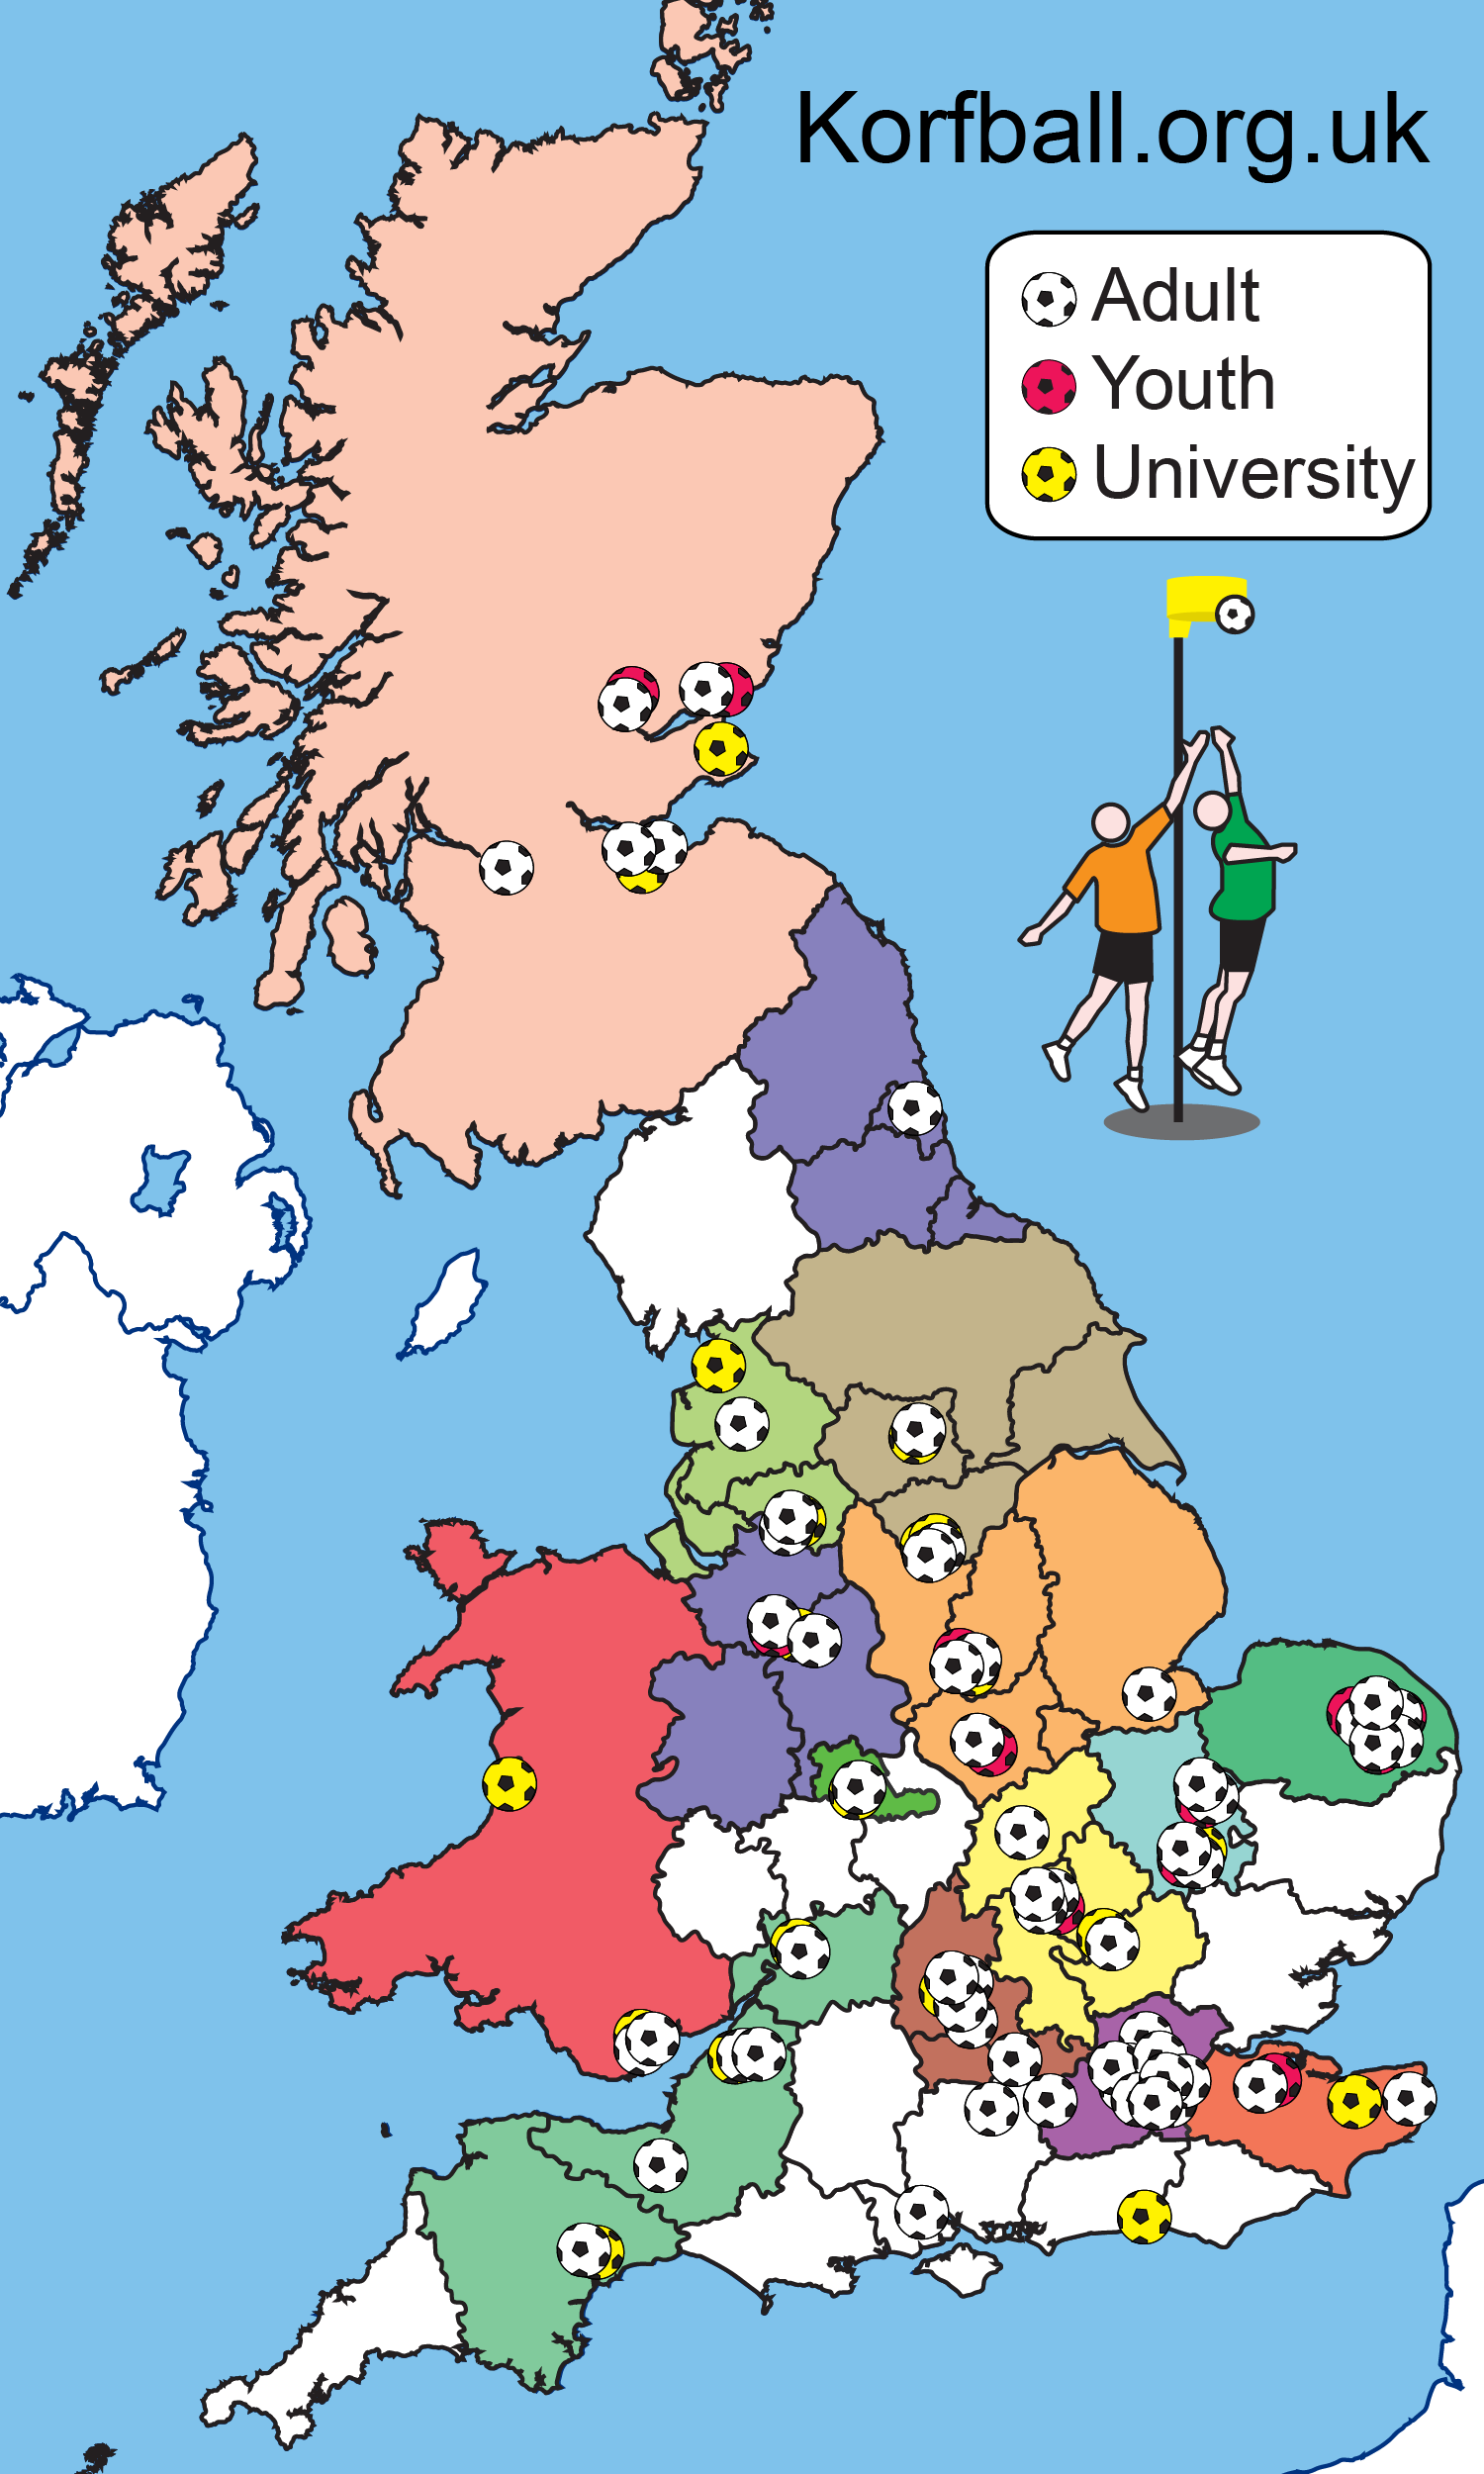 map of UK korfball clubs and areas